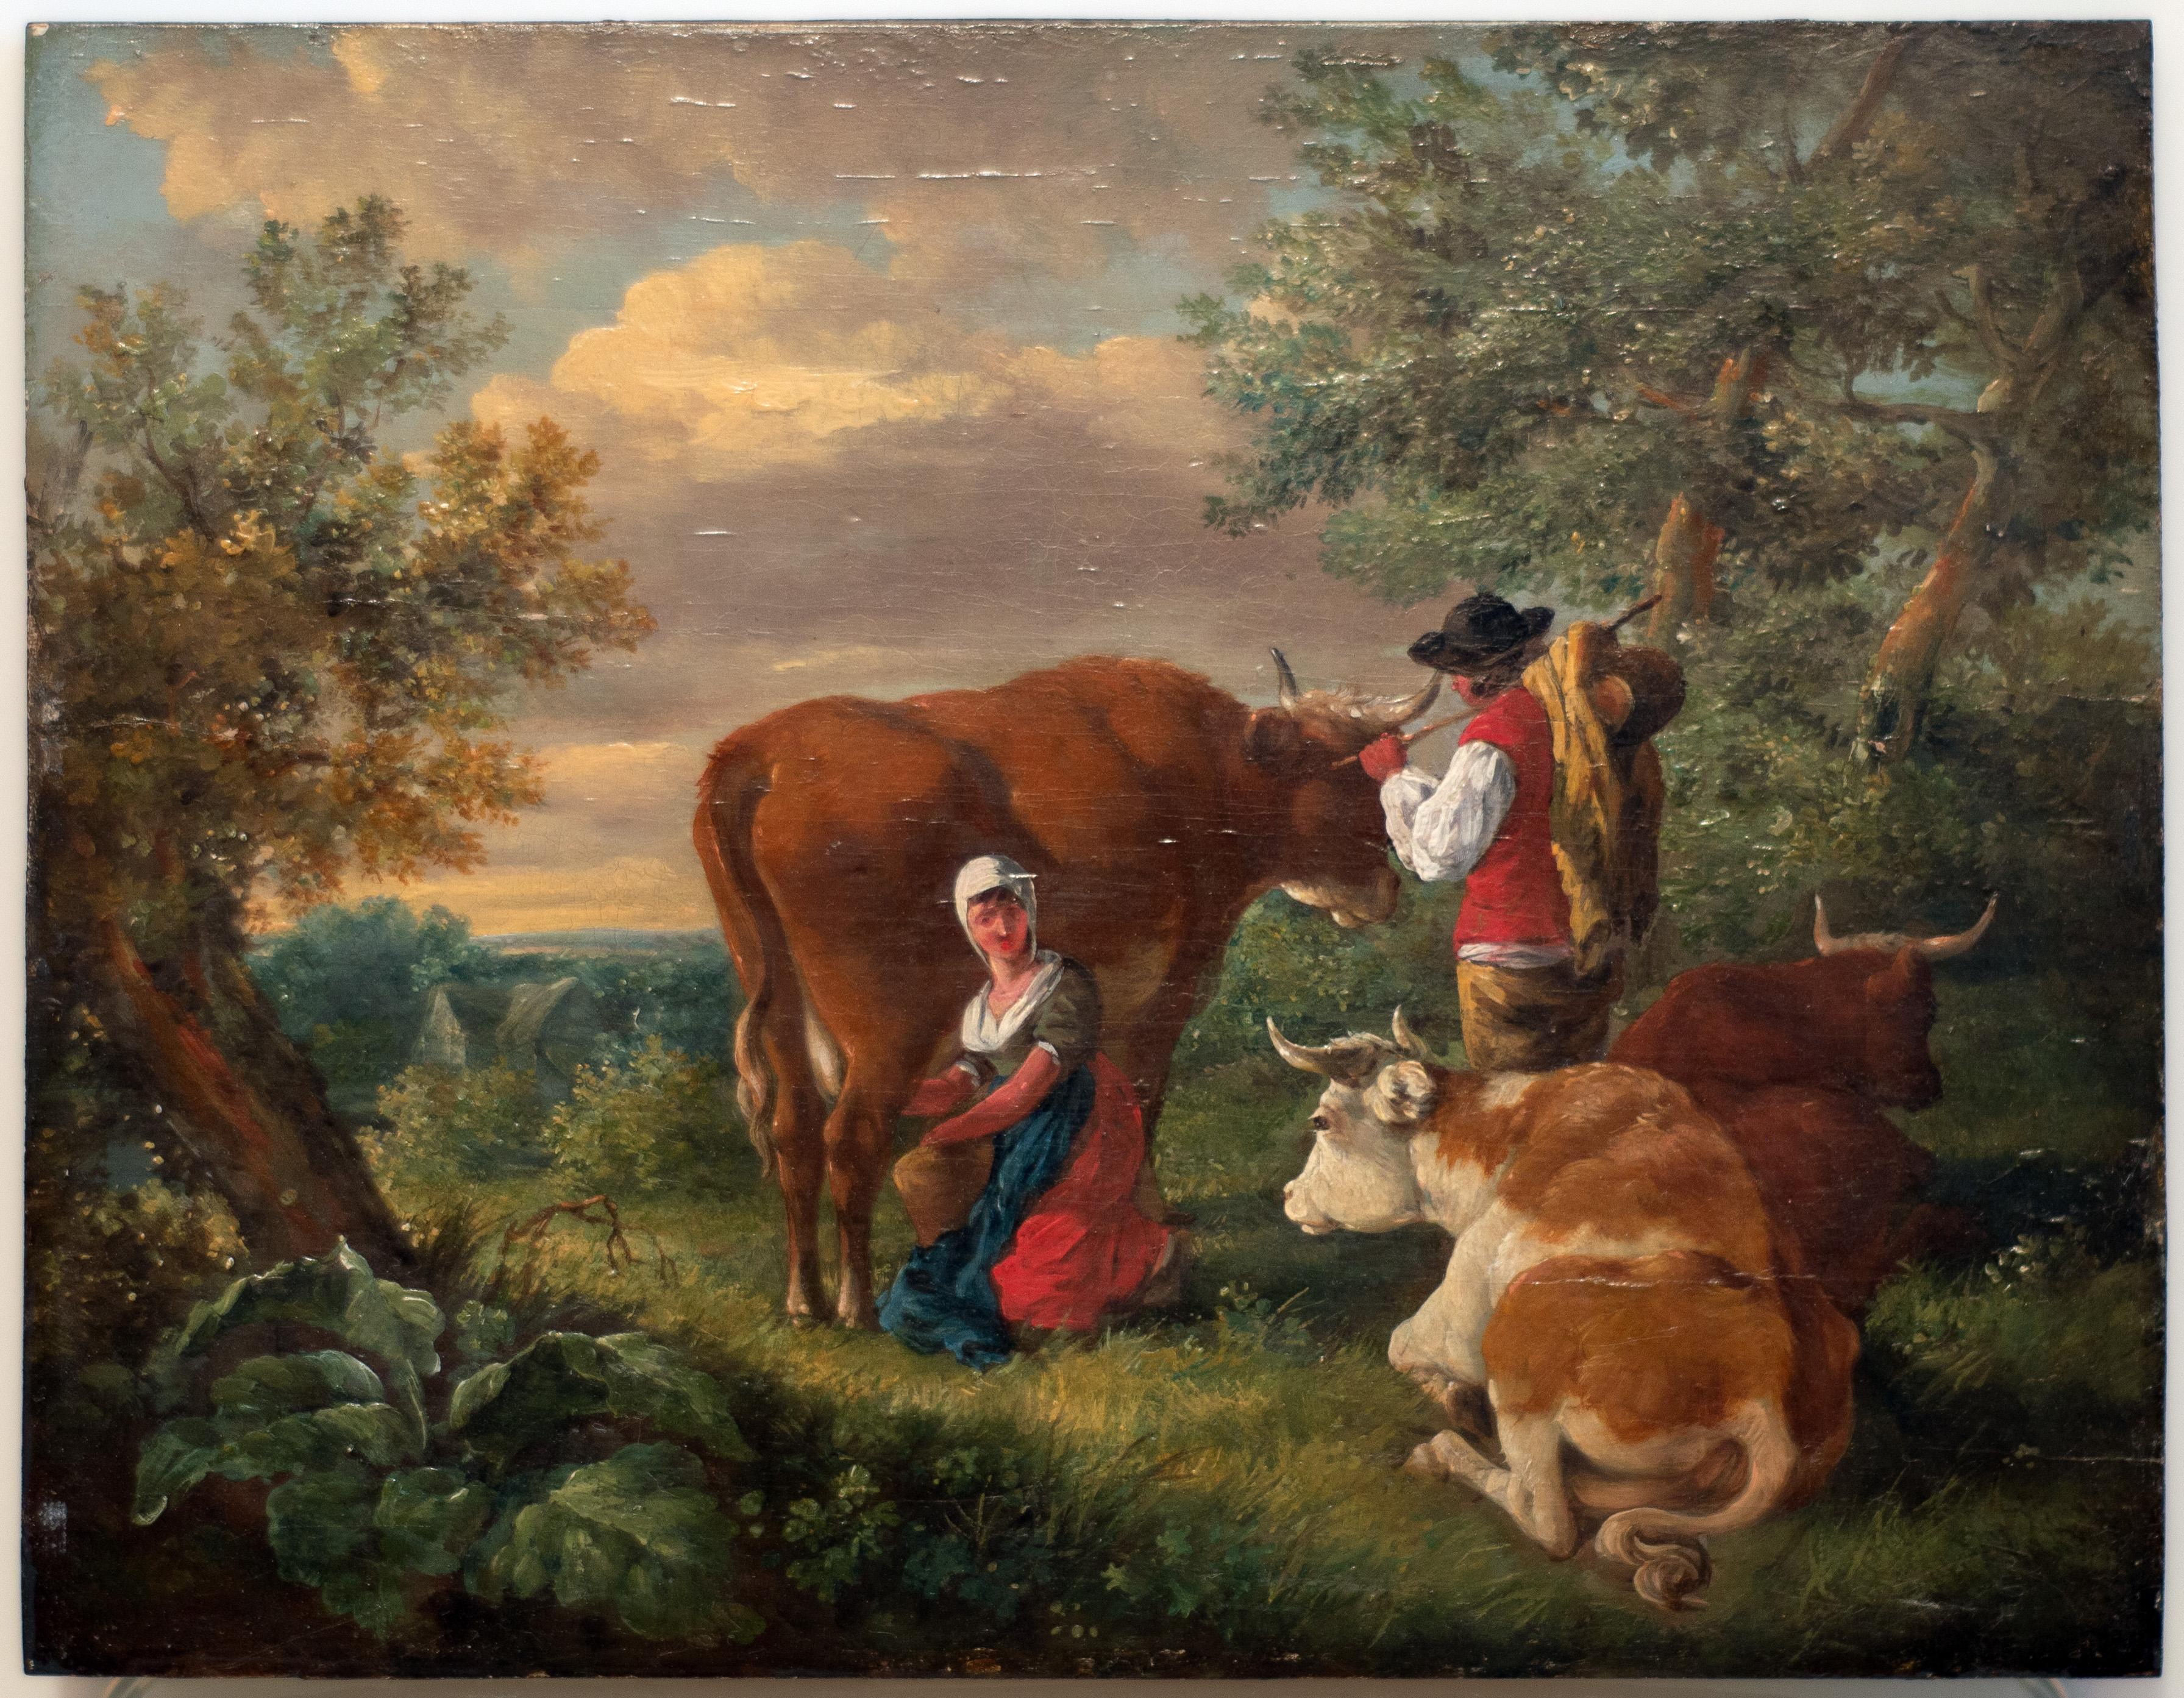 Balthasar Paul Ommeganck (circle) Landscape Painting - Bucolic Landscape - Original Oil on Panel Attributed by B. Ommeganck - Late 1700